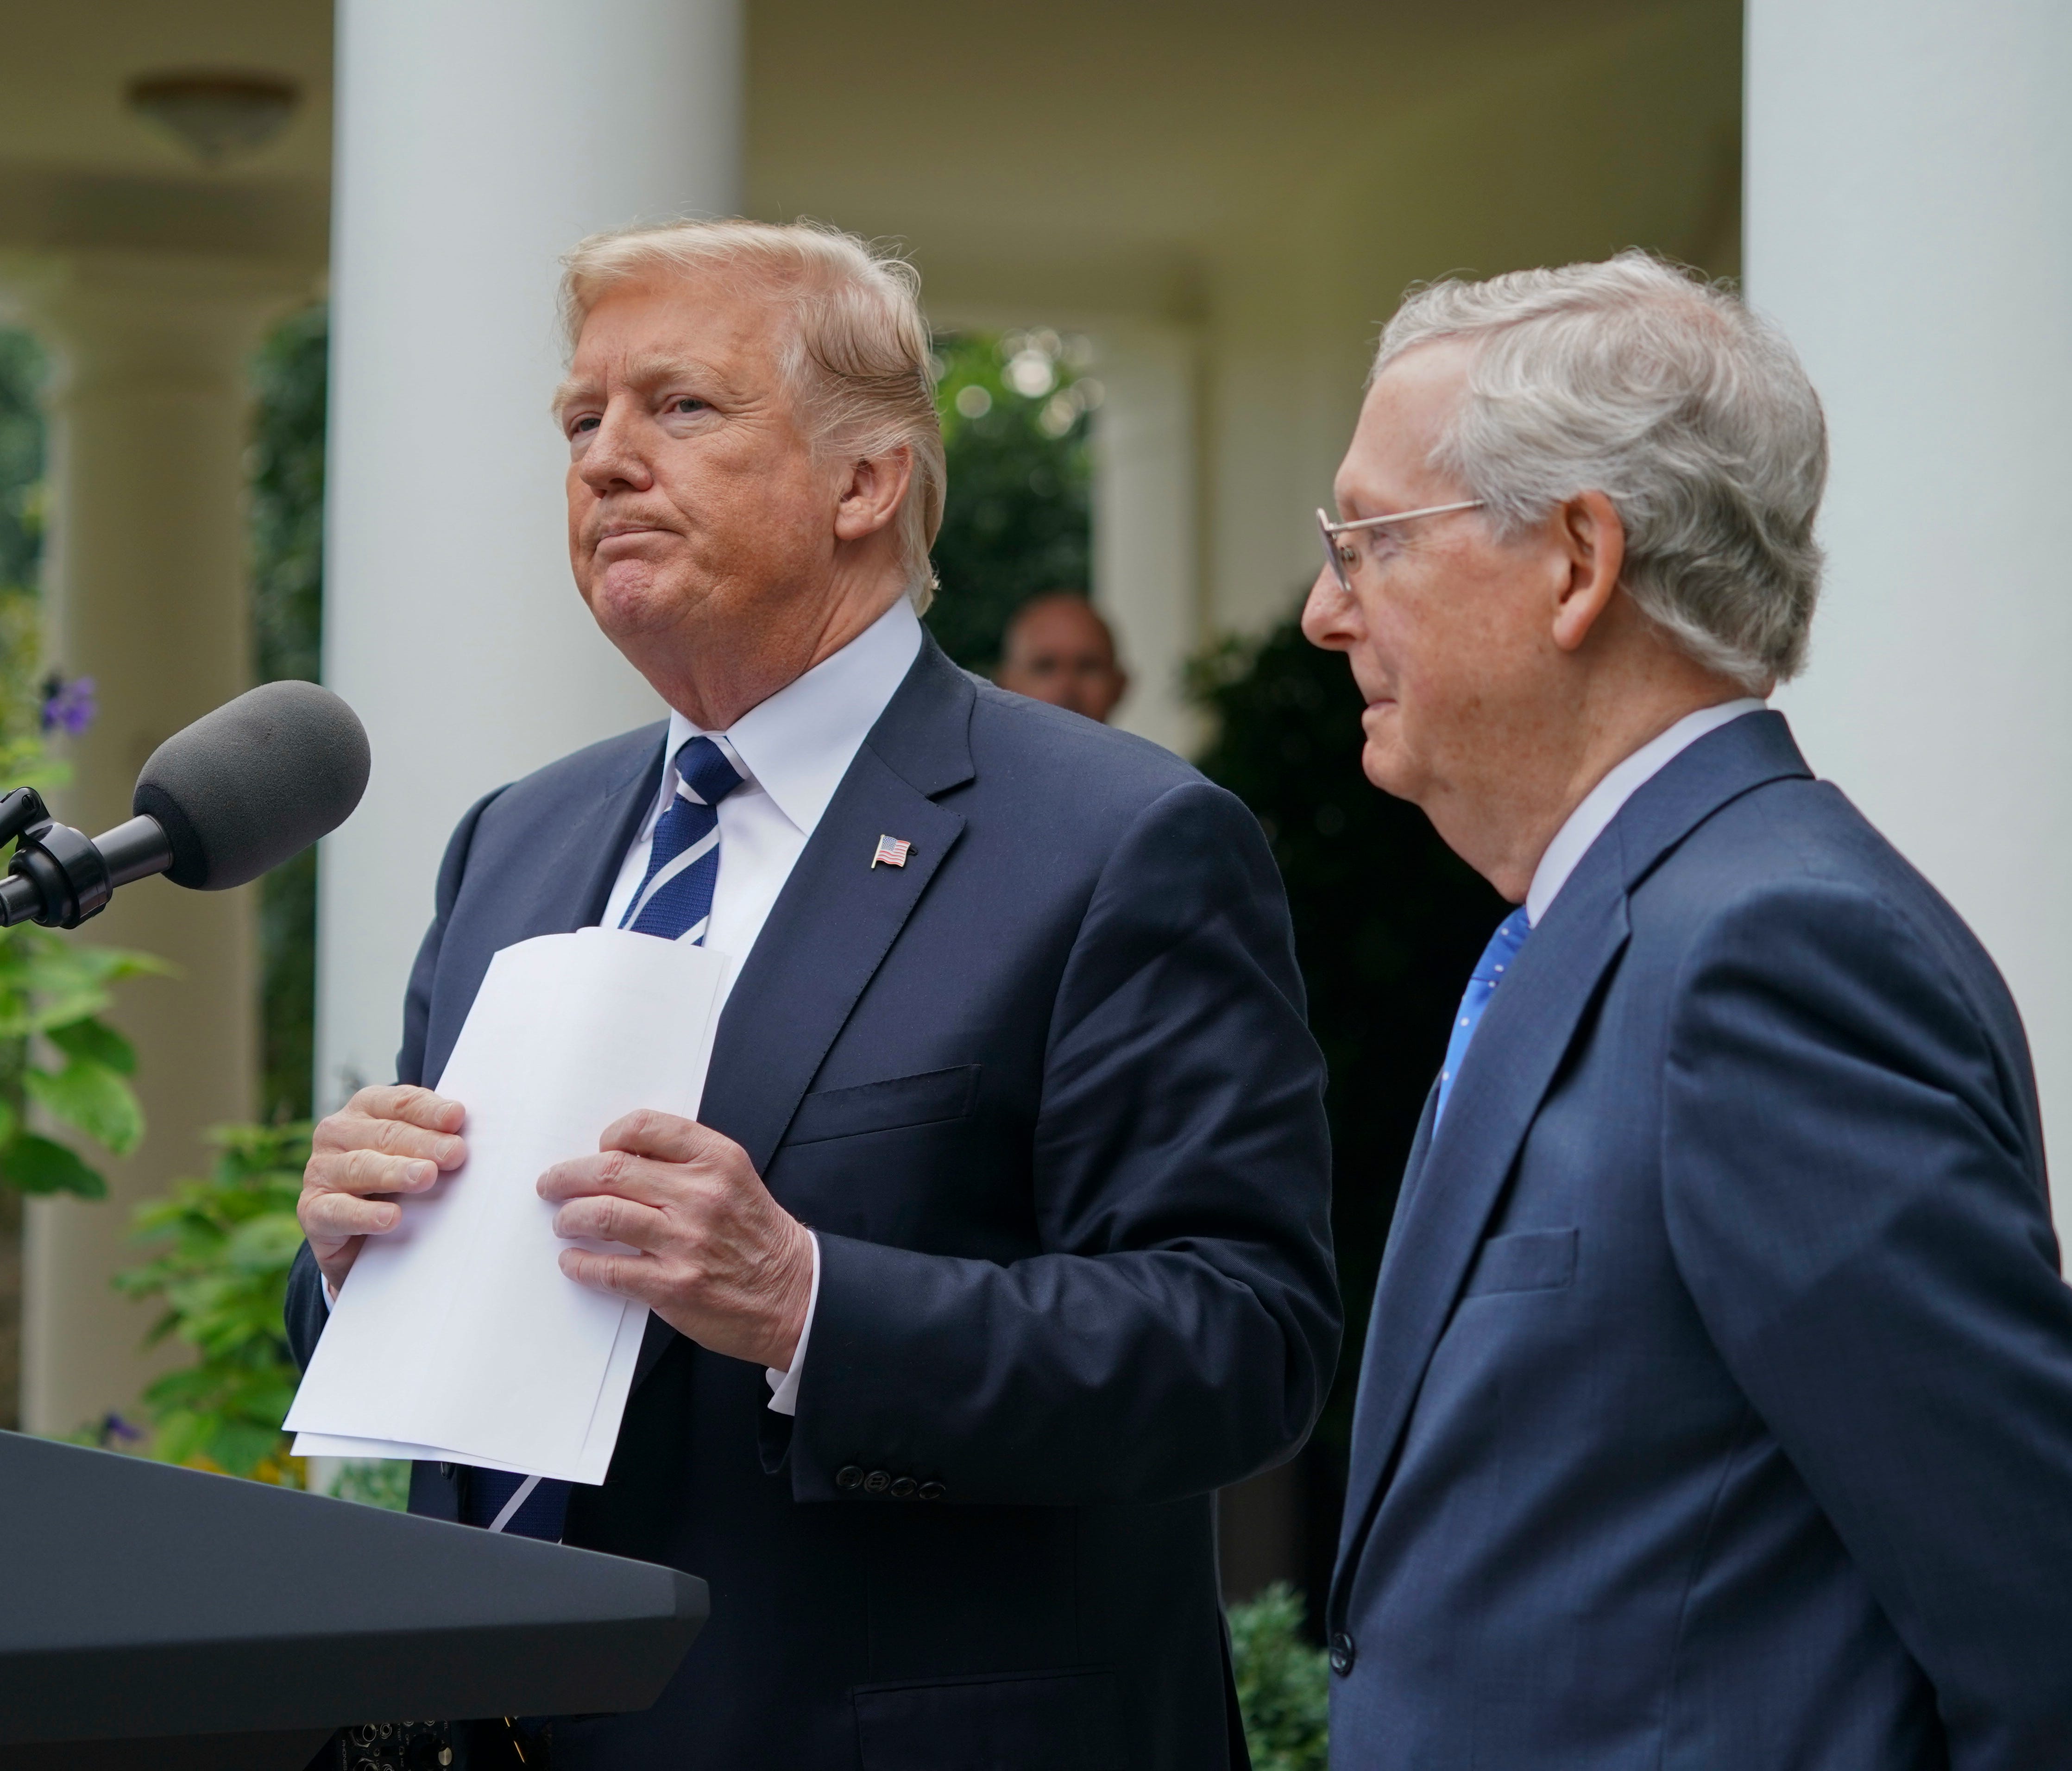 President Trump picks up his notes after he and Senate Majority Leader Mitch McConnell finish up speaking to members of the media in the Rose Garden on Oct. 16, 2017.